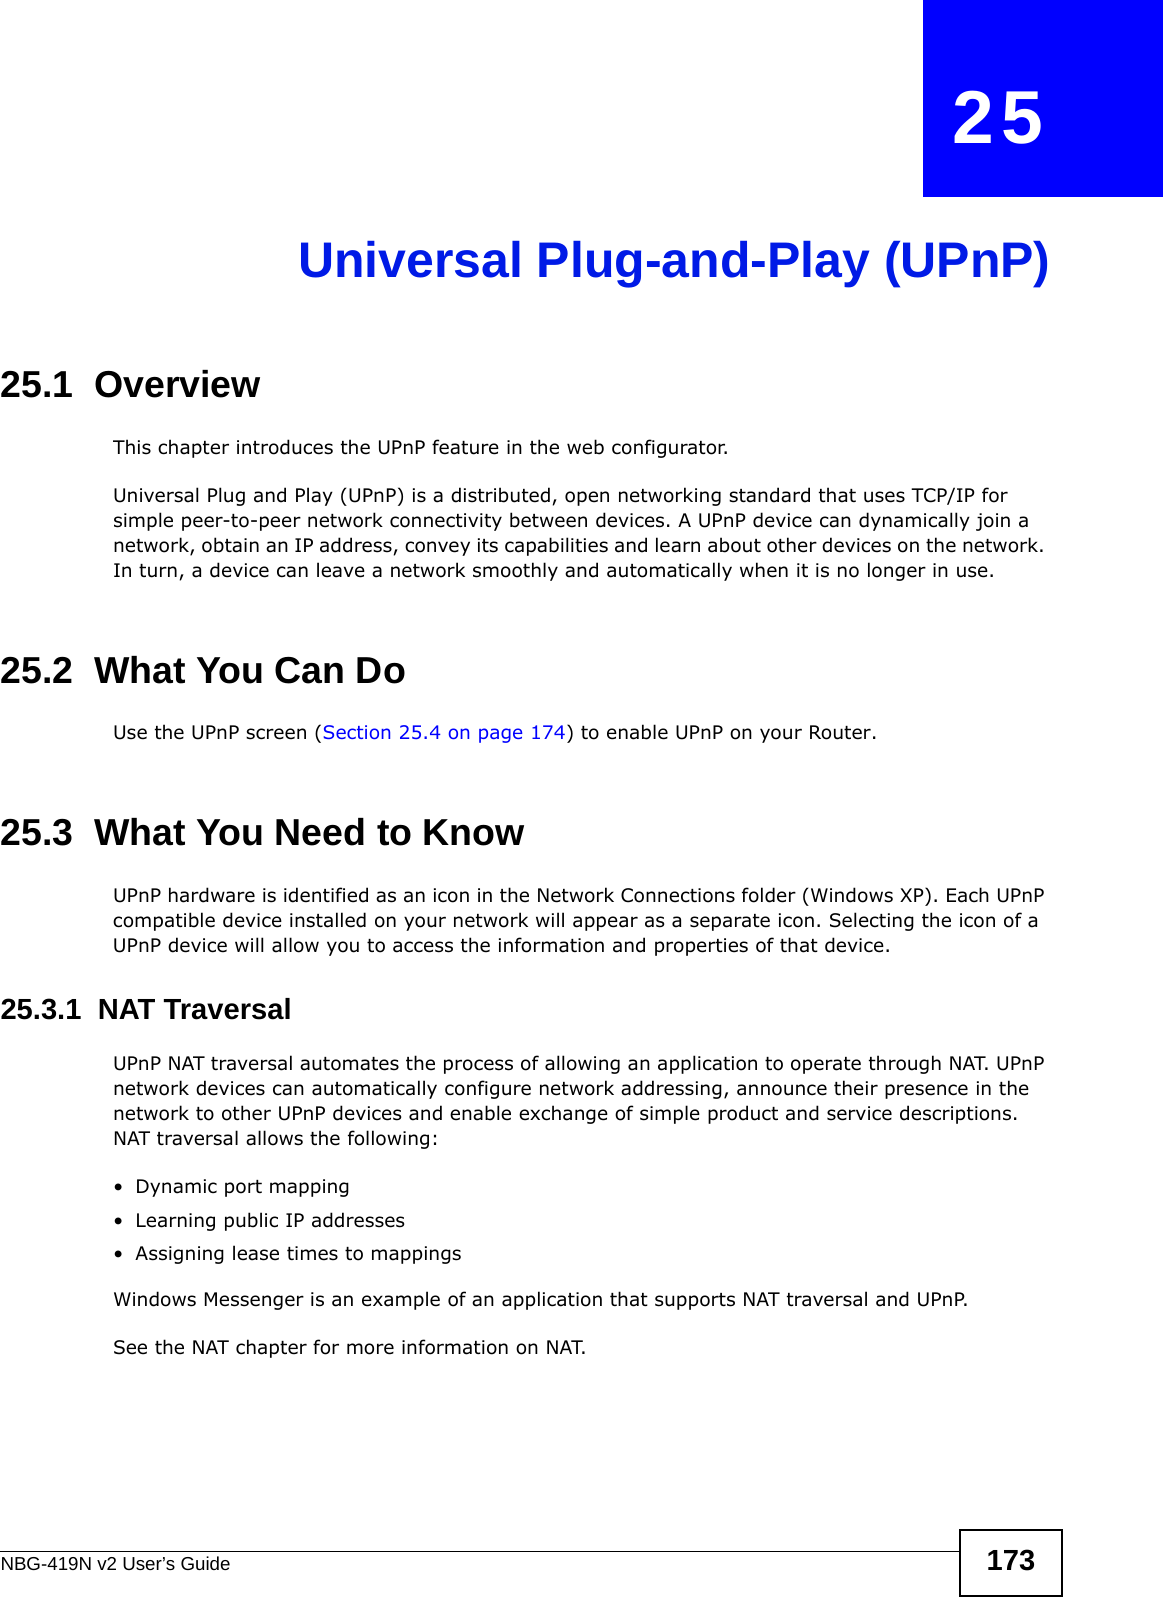 NBG-419N v2 User’s Guide 173CHAPTER   25Universal Plug-and-Play (UPnP)25.1  Overview This chapter introduces the UPnP feature in the web configurator.Universal Plug and Play (UPnP) is a distributed, open networking standard that uses TCP/IP for simple peer-to-peer network connectivity between devices. A UPnP device can dynamically join a network, obtain an IP address, convey its capabilities and learn about other devices on the network. In turn, a device can leave a network smoothly and automatically when it is no longer in use.25.2  What You Can DoUse the UPnP screen (Section 25.4 on page 174) to enable UPnP on your Router.25.3  What You Need to KnowUPnP hardware is identified as an icon in the Network Connections folder (Windows XP). Each UPnP compatible device installed on your network will appear as a separate icon. Selecting the icon of a UPnP device will allow you to access the information and properties of that device. 25.3.1  NAT TraversalUPnP NAT traversal automates the process of allowing an application to operate through NAT. UPnP network devices can automatically configure network addressing, announce their presence in the network to other UPnP devices and enable exchange of simple product and service descriptions. NAT traversal allows the following:• Dynamic port mapping• Learning public IP addresses• Assigning lease times to mappingsWindows Messenger is an example of an application that supports NAT traversal and UPnP. See the NAT chapter for more information on NAT.